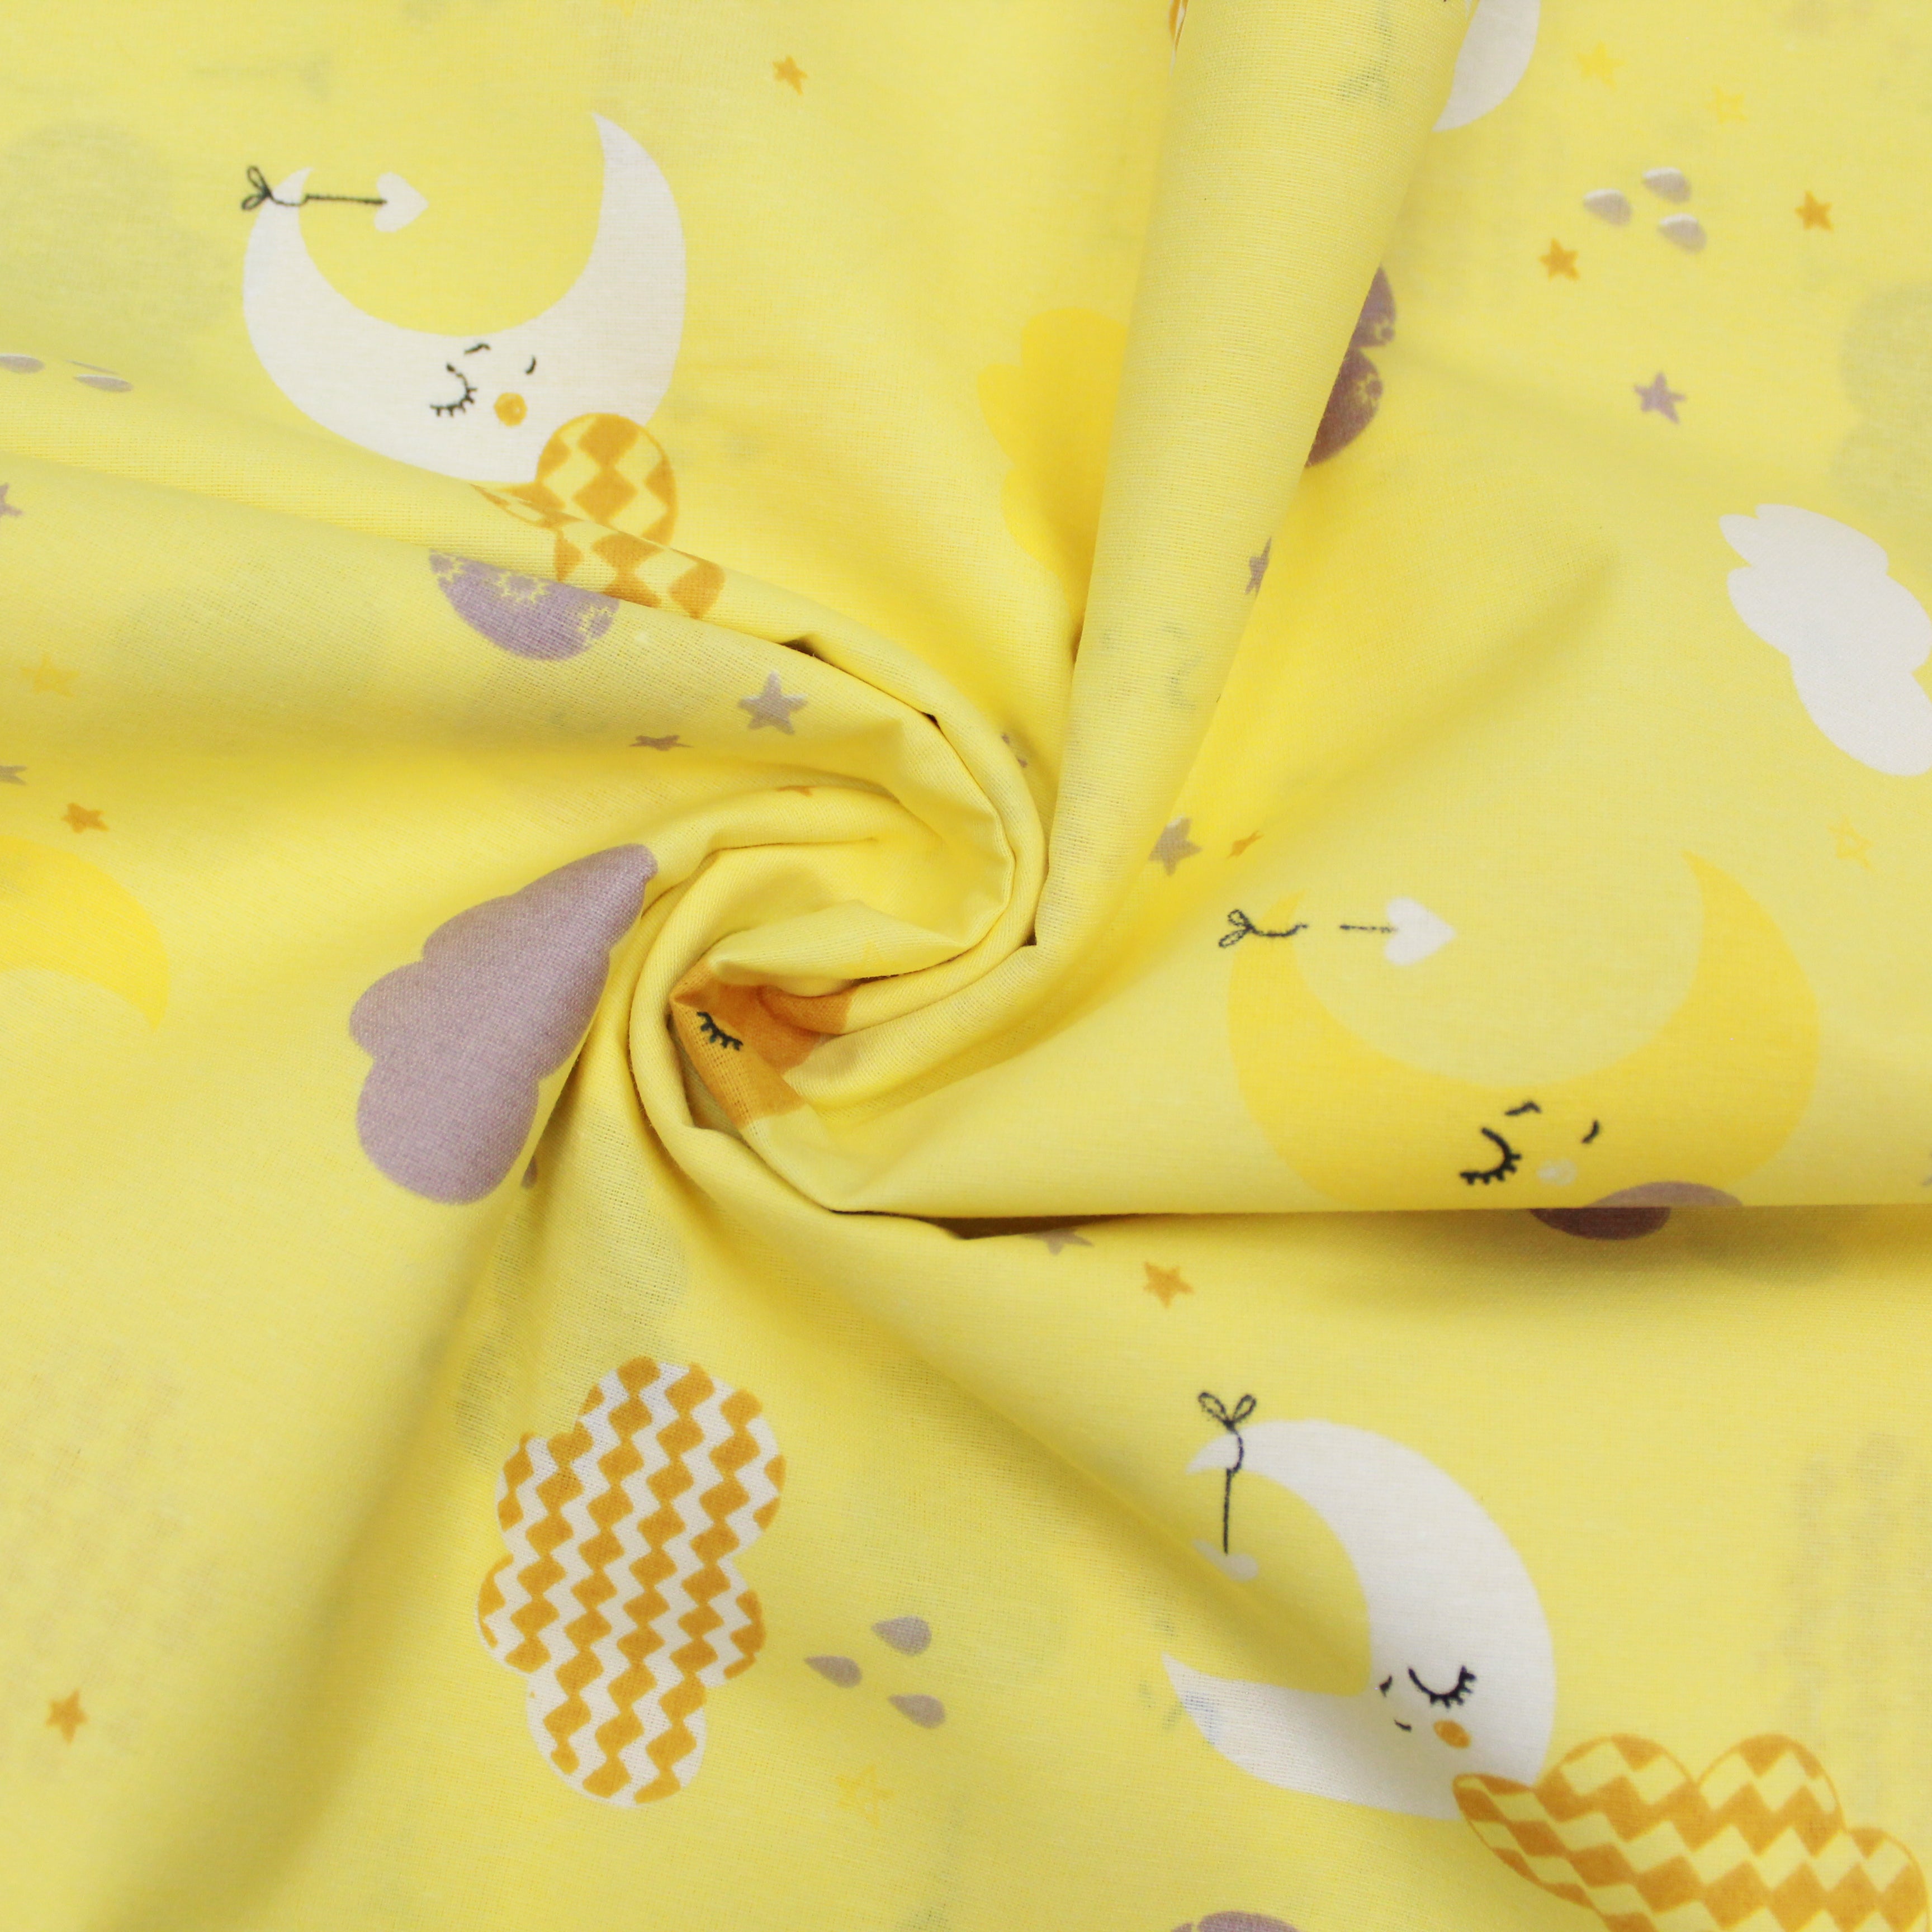 Premium Quality Super Wide Cotton Blend Sheeting "Cloud Moon 94" Wide Yellow